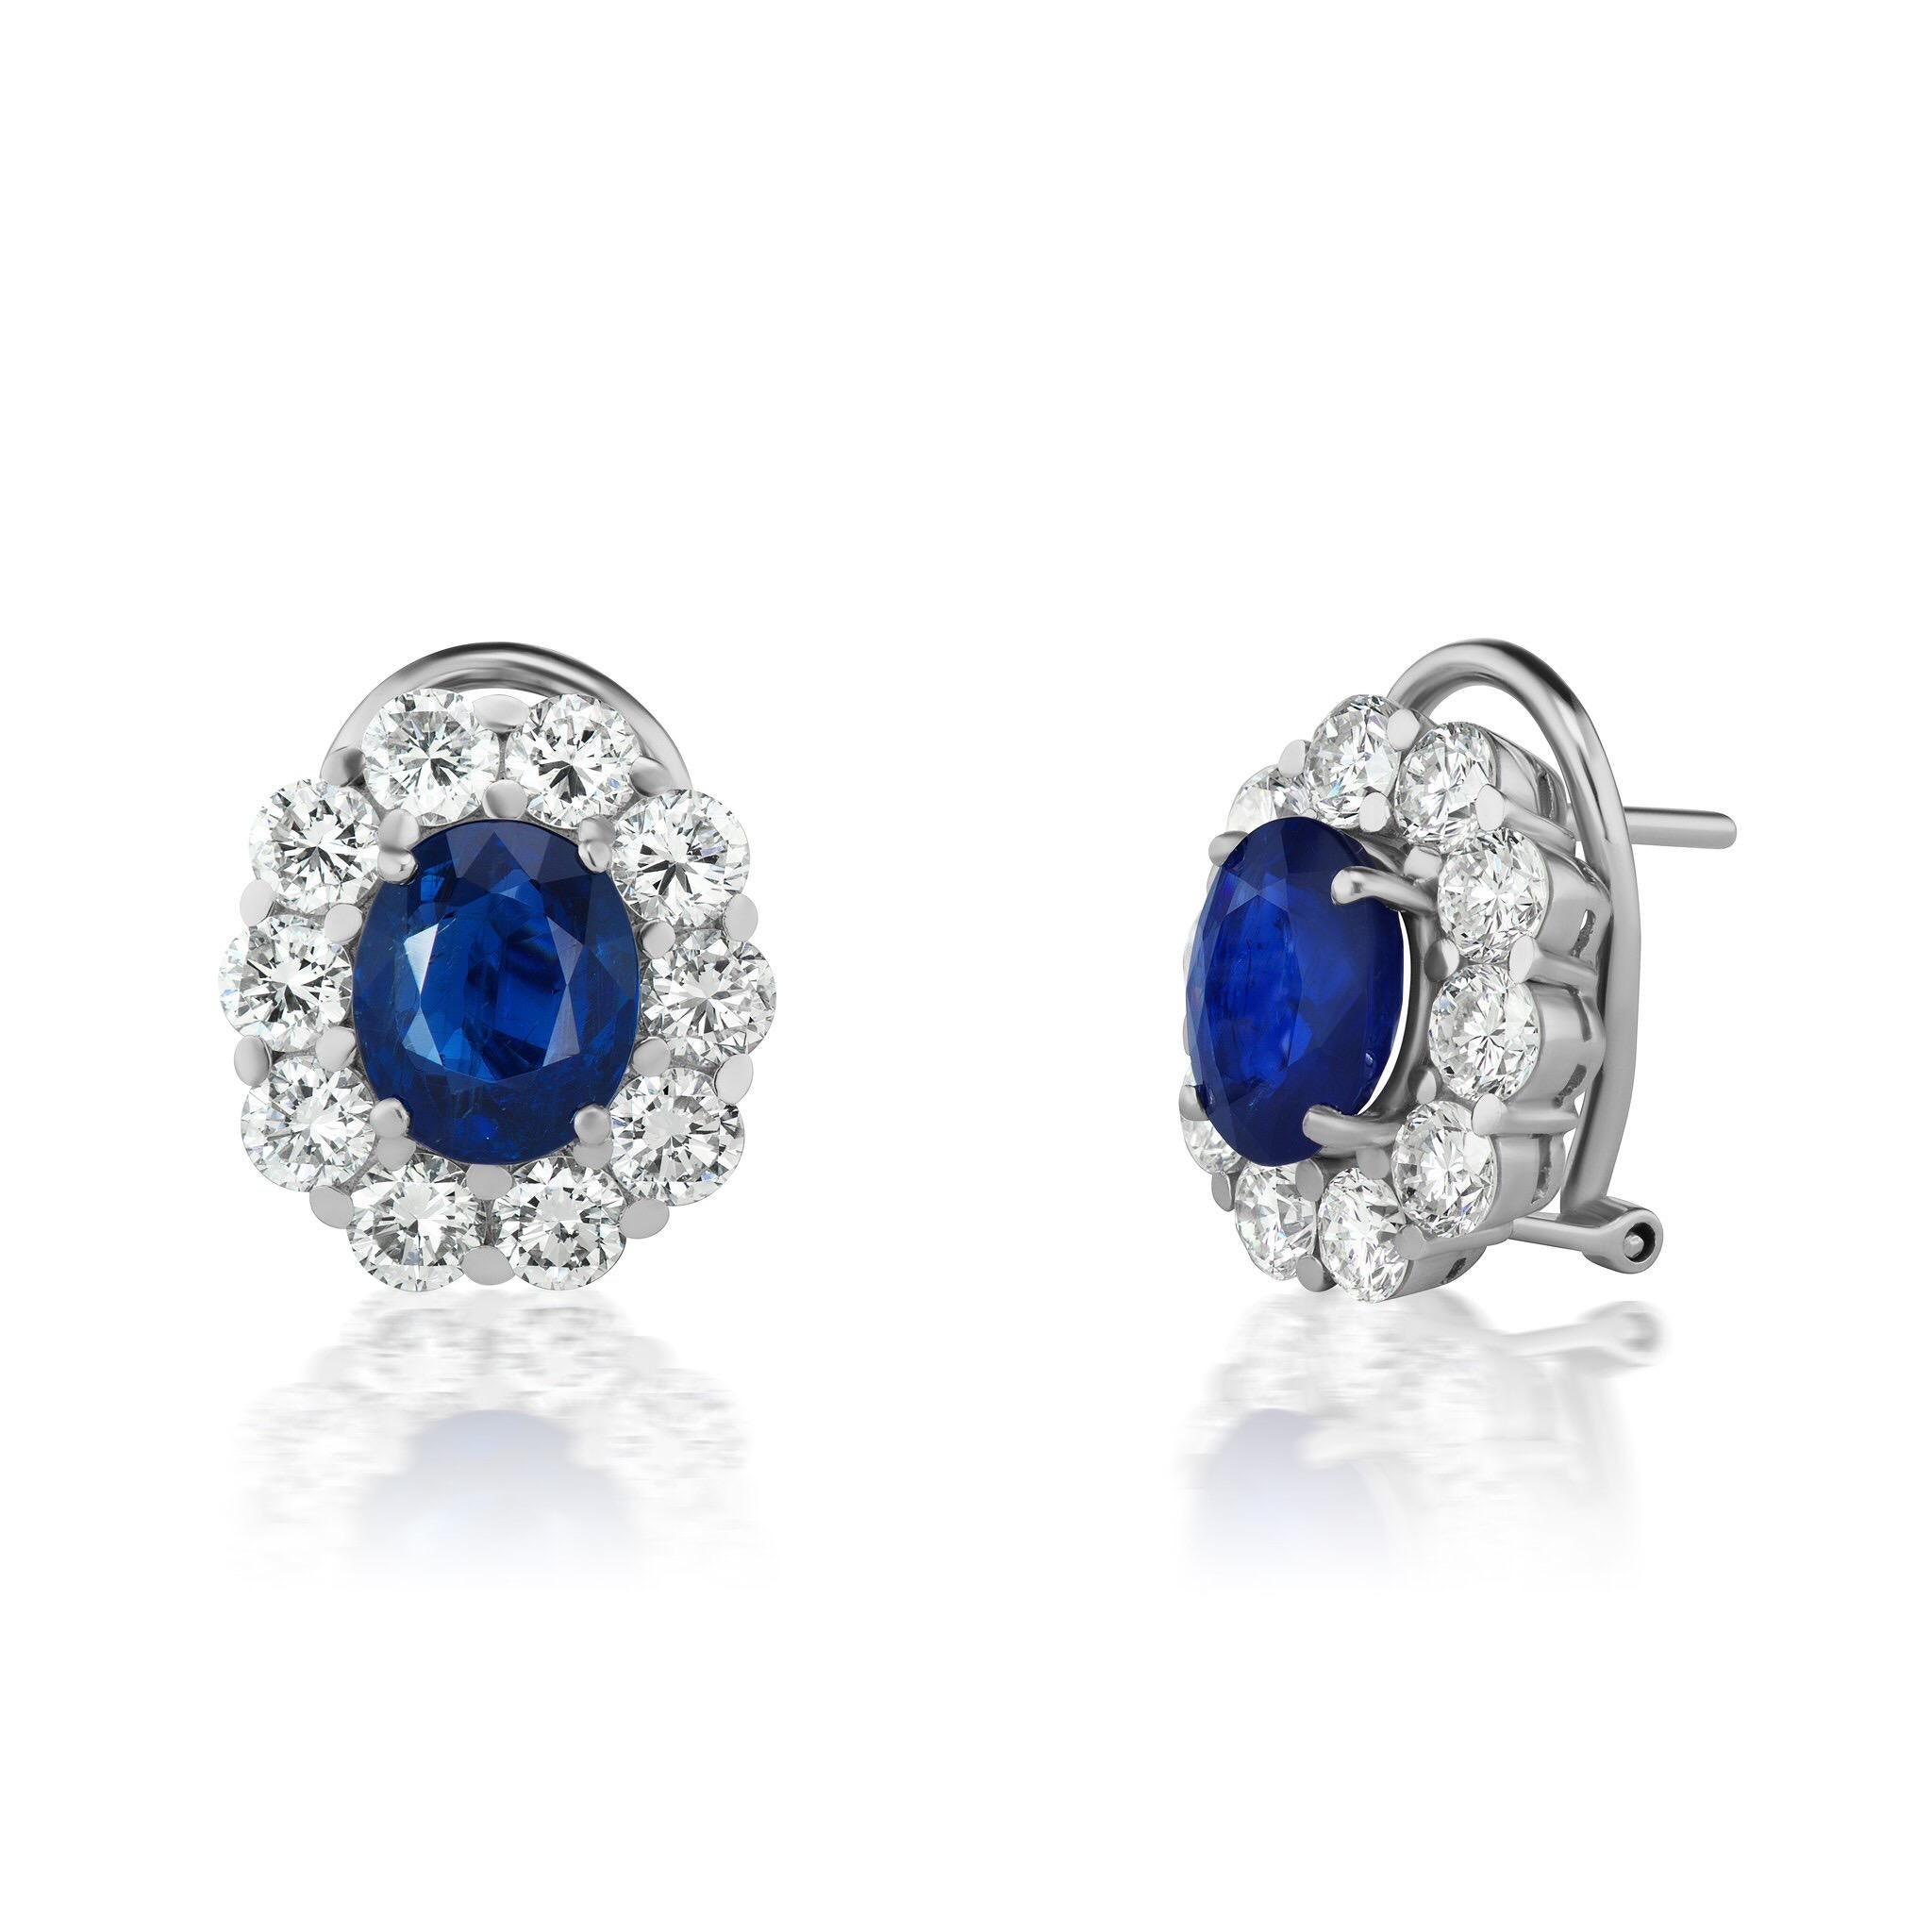 NON-HEATED BURMA SAPPHIRES and Conflict Free Diamond Cluster Earrings made for Royalty! The oval Sapphires total 5.08 total weight and the diamond halo clusters contain 20  F color VS quality diamonds weighing 4.00 CT. total weight. They are set in